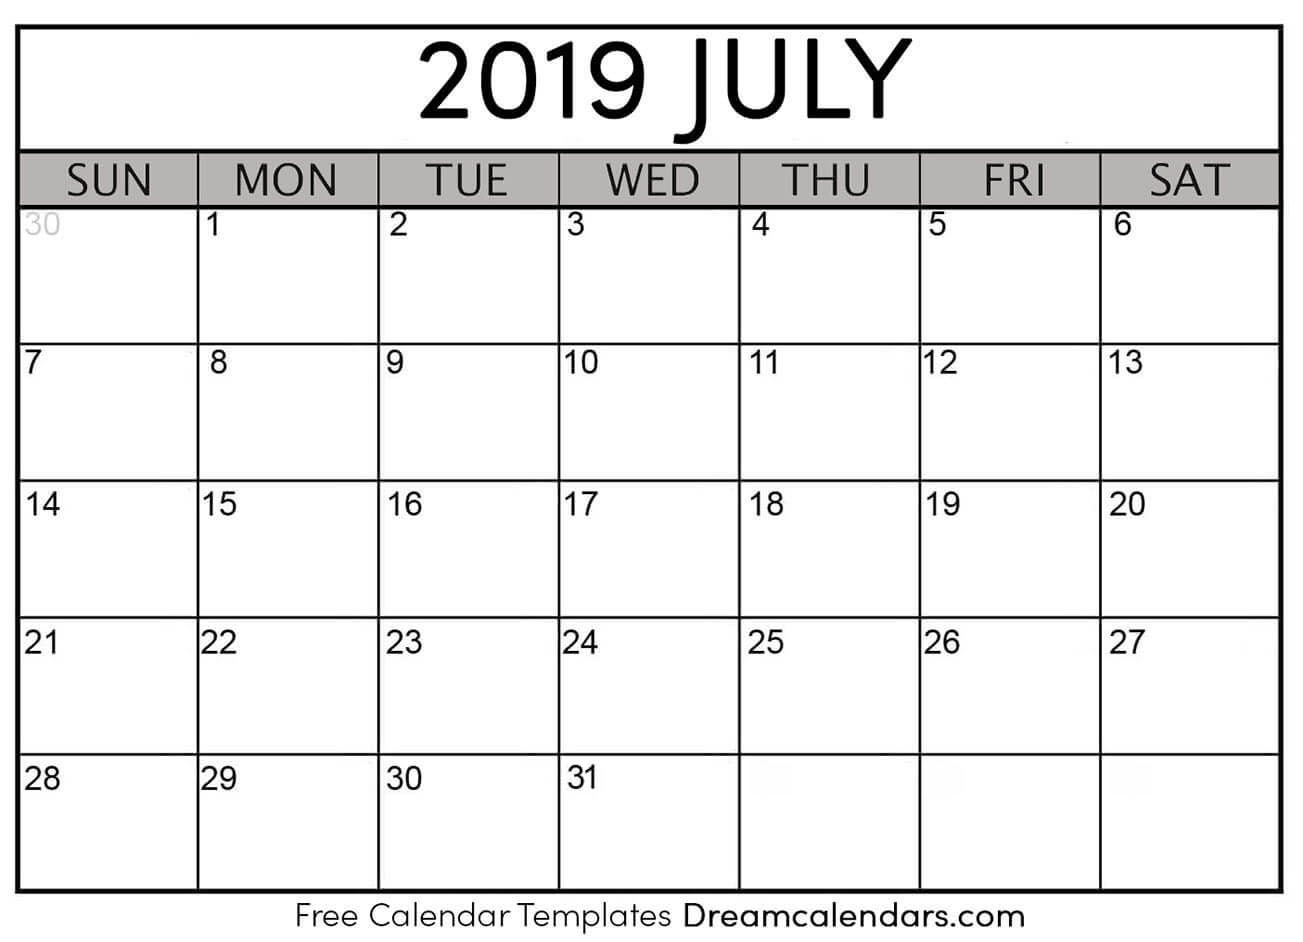 Printable July 2019 Calendar with Free At A Glance Editable Calendar July 2019-June 2020